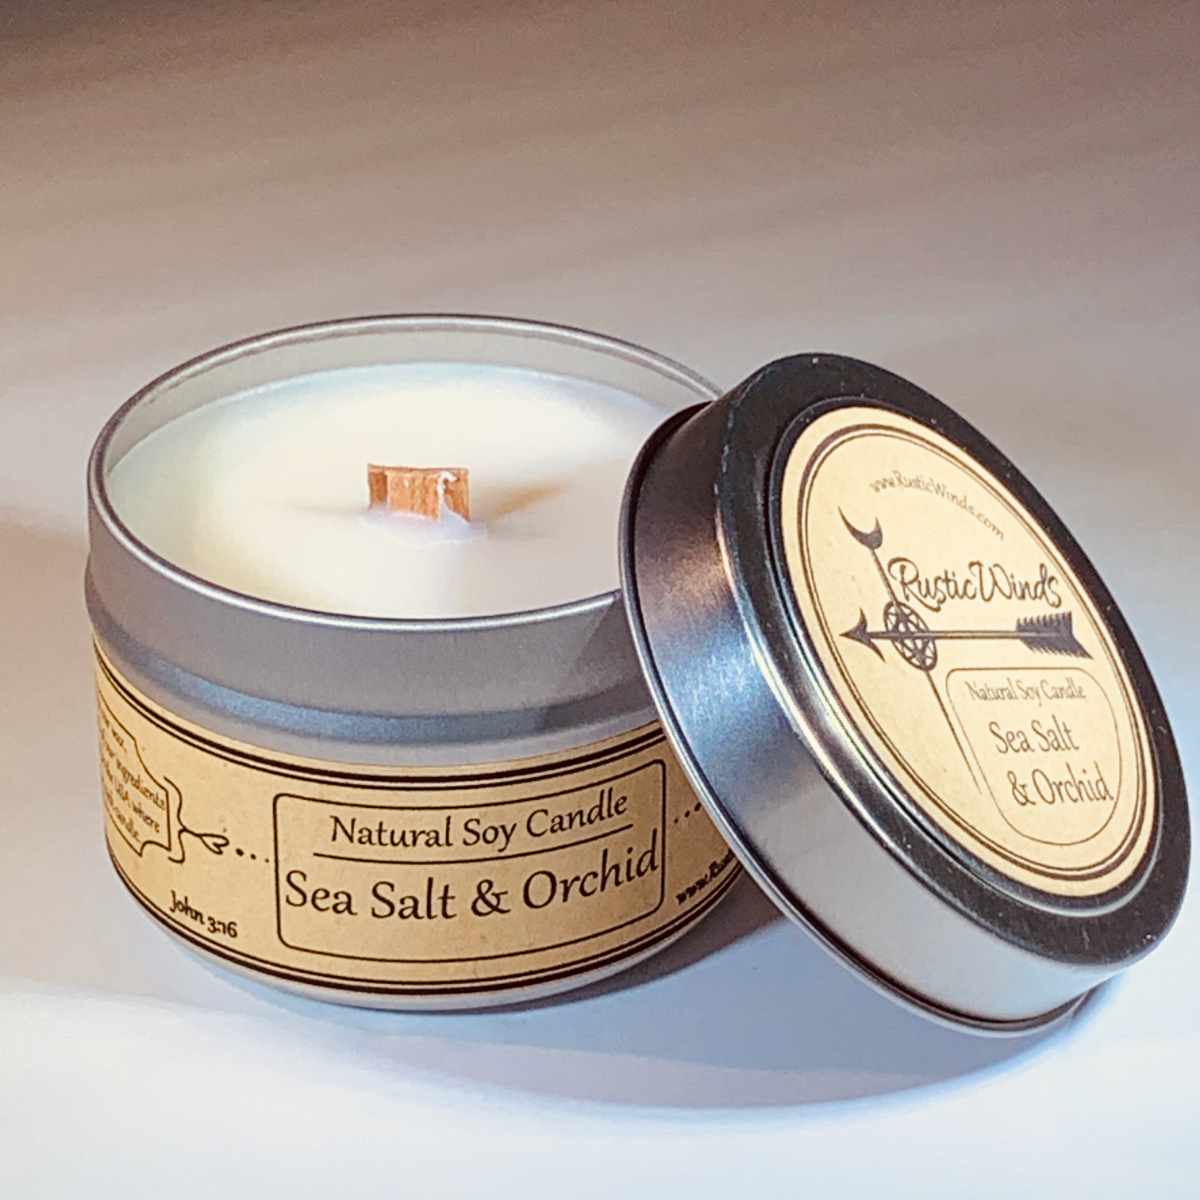 Sea Salt & Orchid - Soy Candle